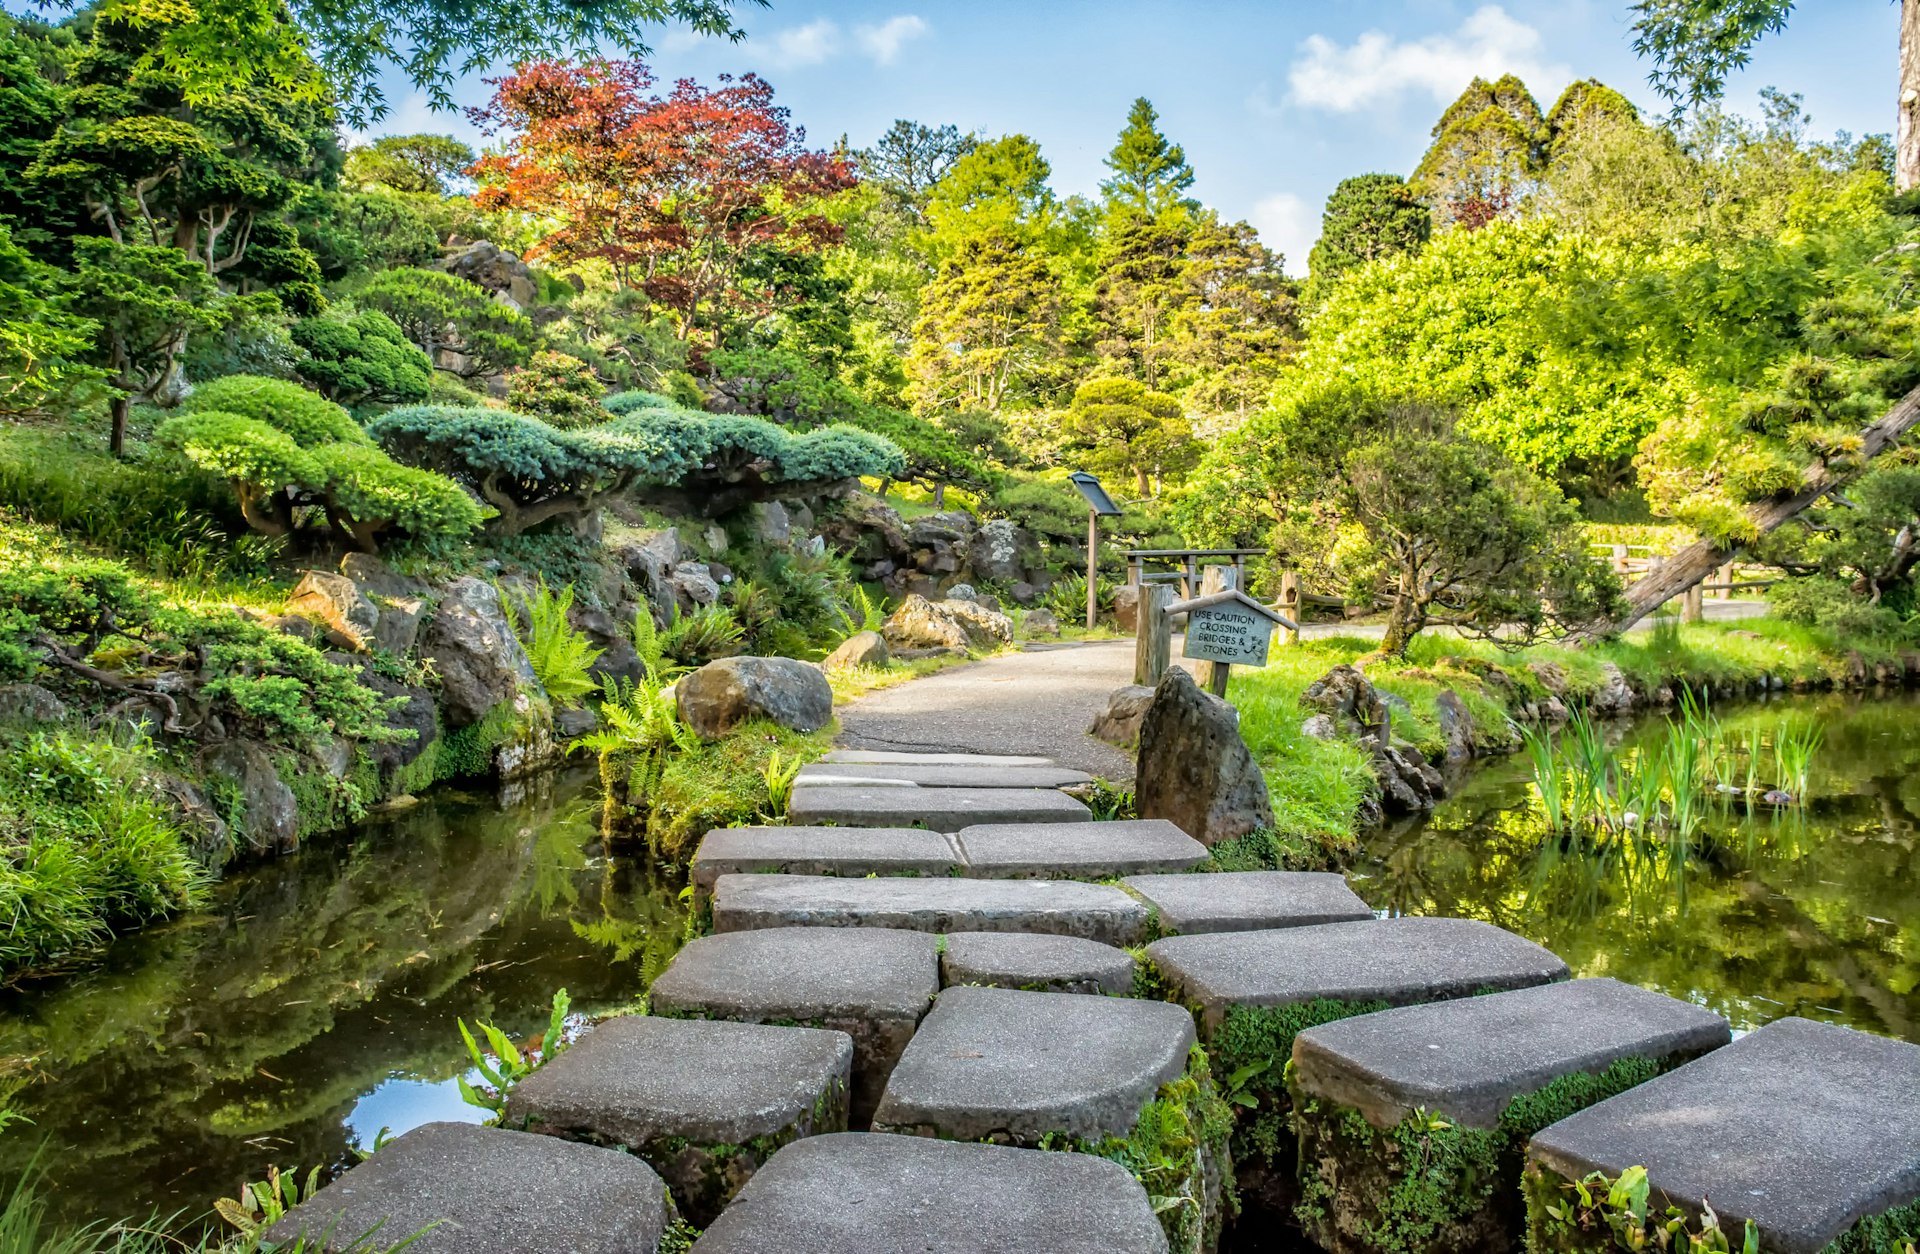 Stone footpath at the Japanese Garden in Golden Gate Park in San Francisco